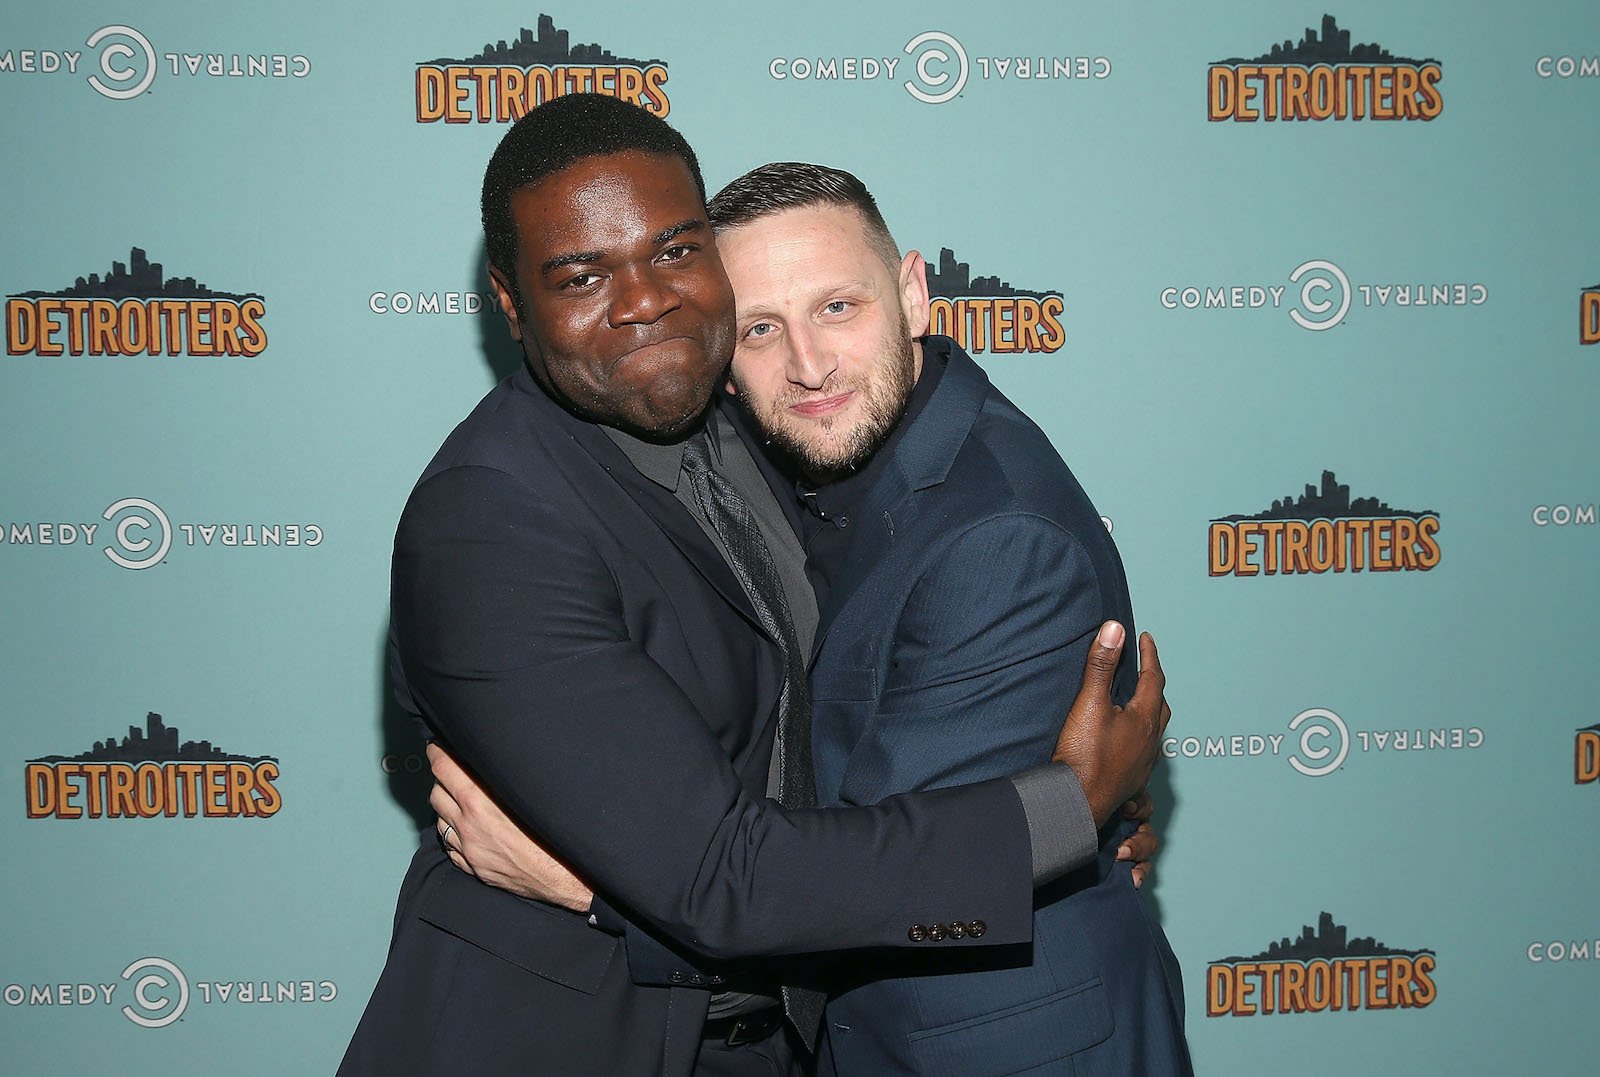 Are Sam Richardson and Tim Robinson best friends? They attended the Detroiters premiere party in 2017 together